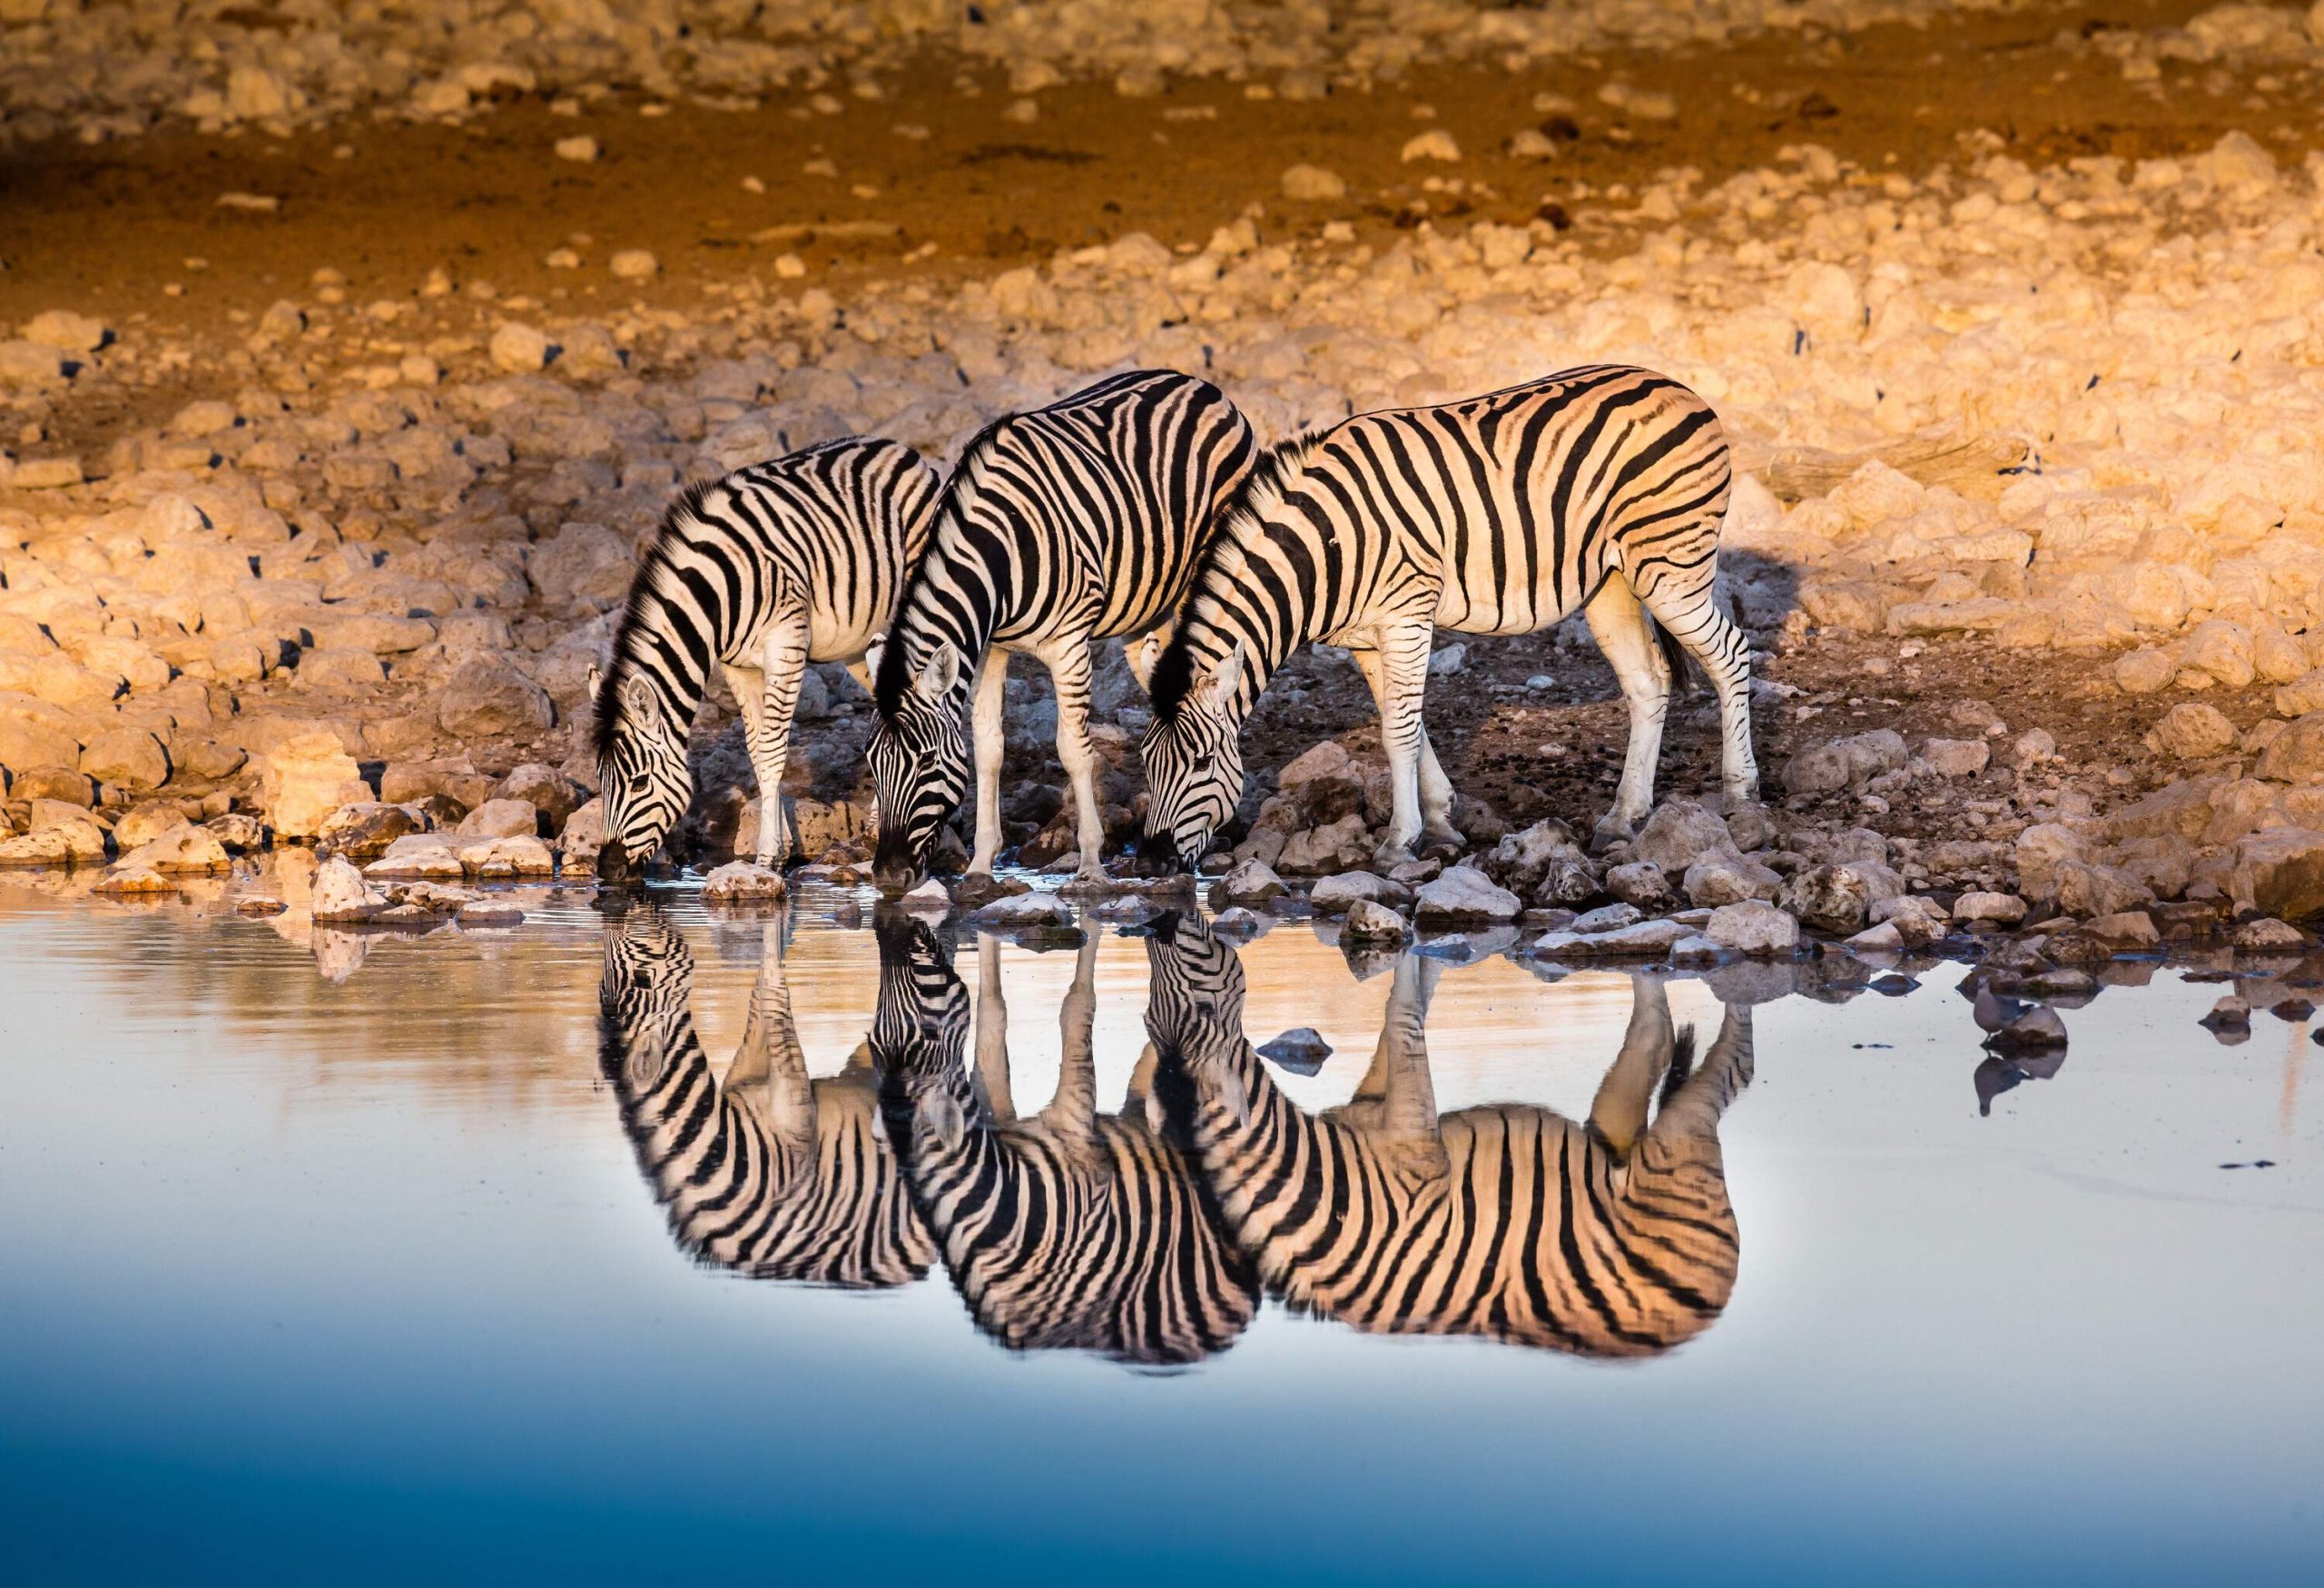 Three zebras drinking water from a pond, with their reflections mirroring on the surface.